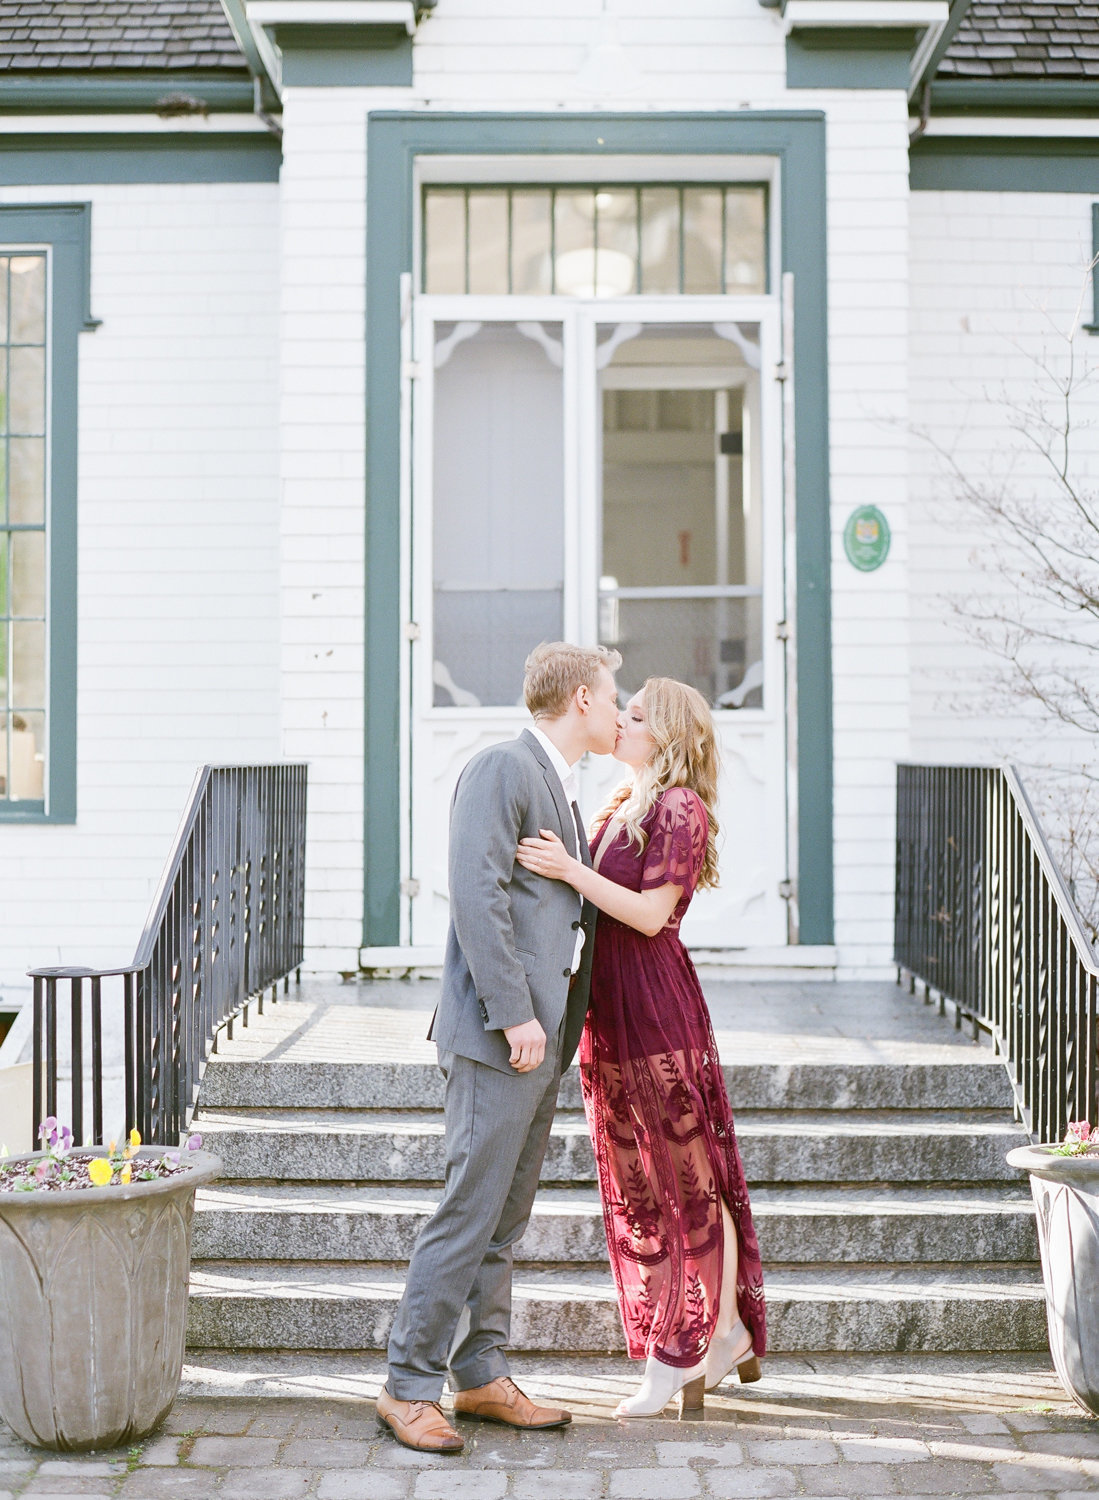 Jacqueline Anne Photography - Amanda and Brent-89